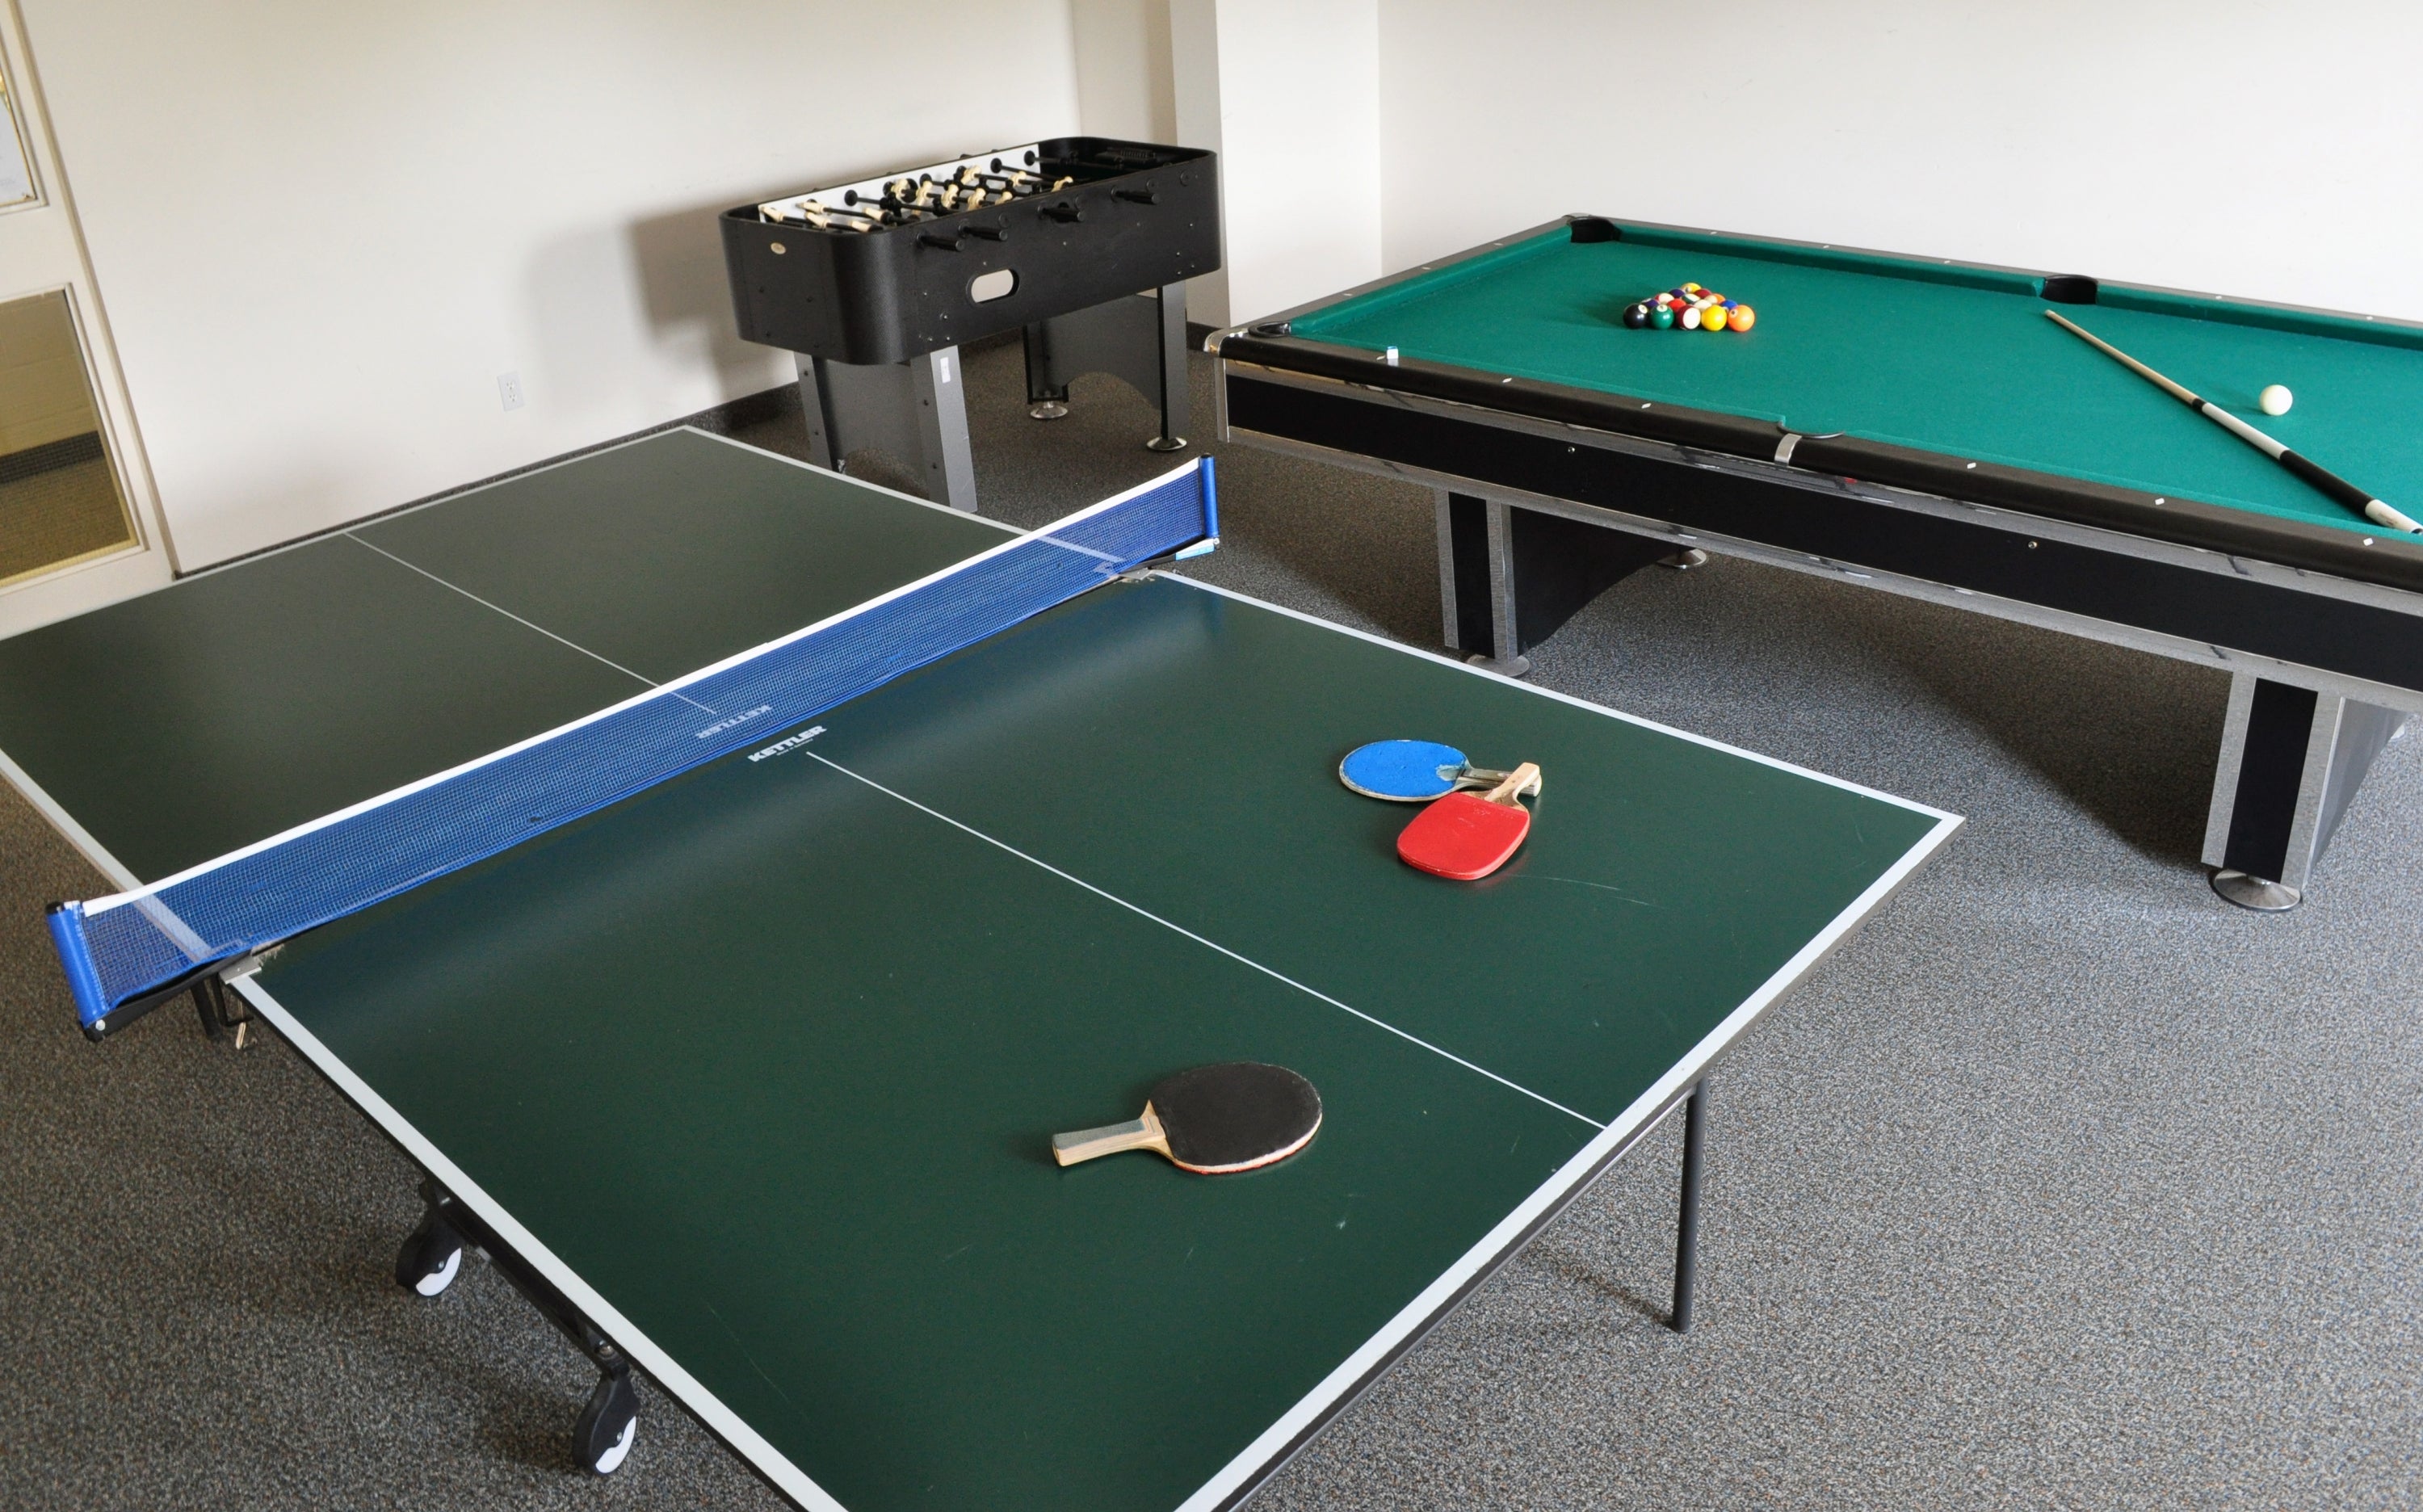 Ping pong table, with pool table behind it